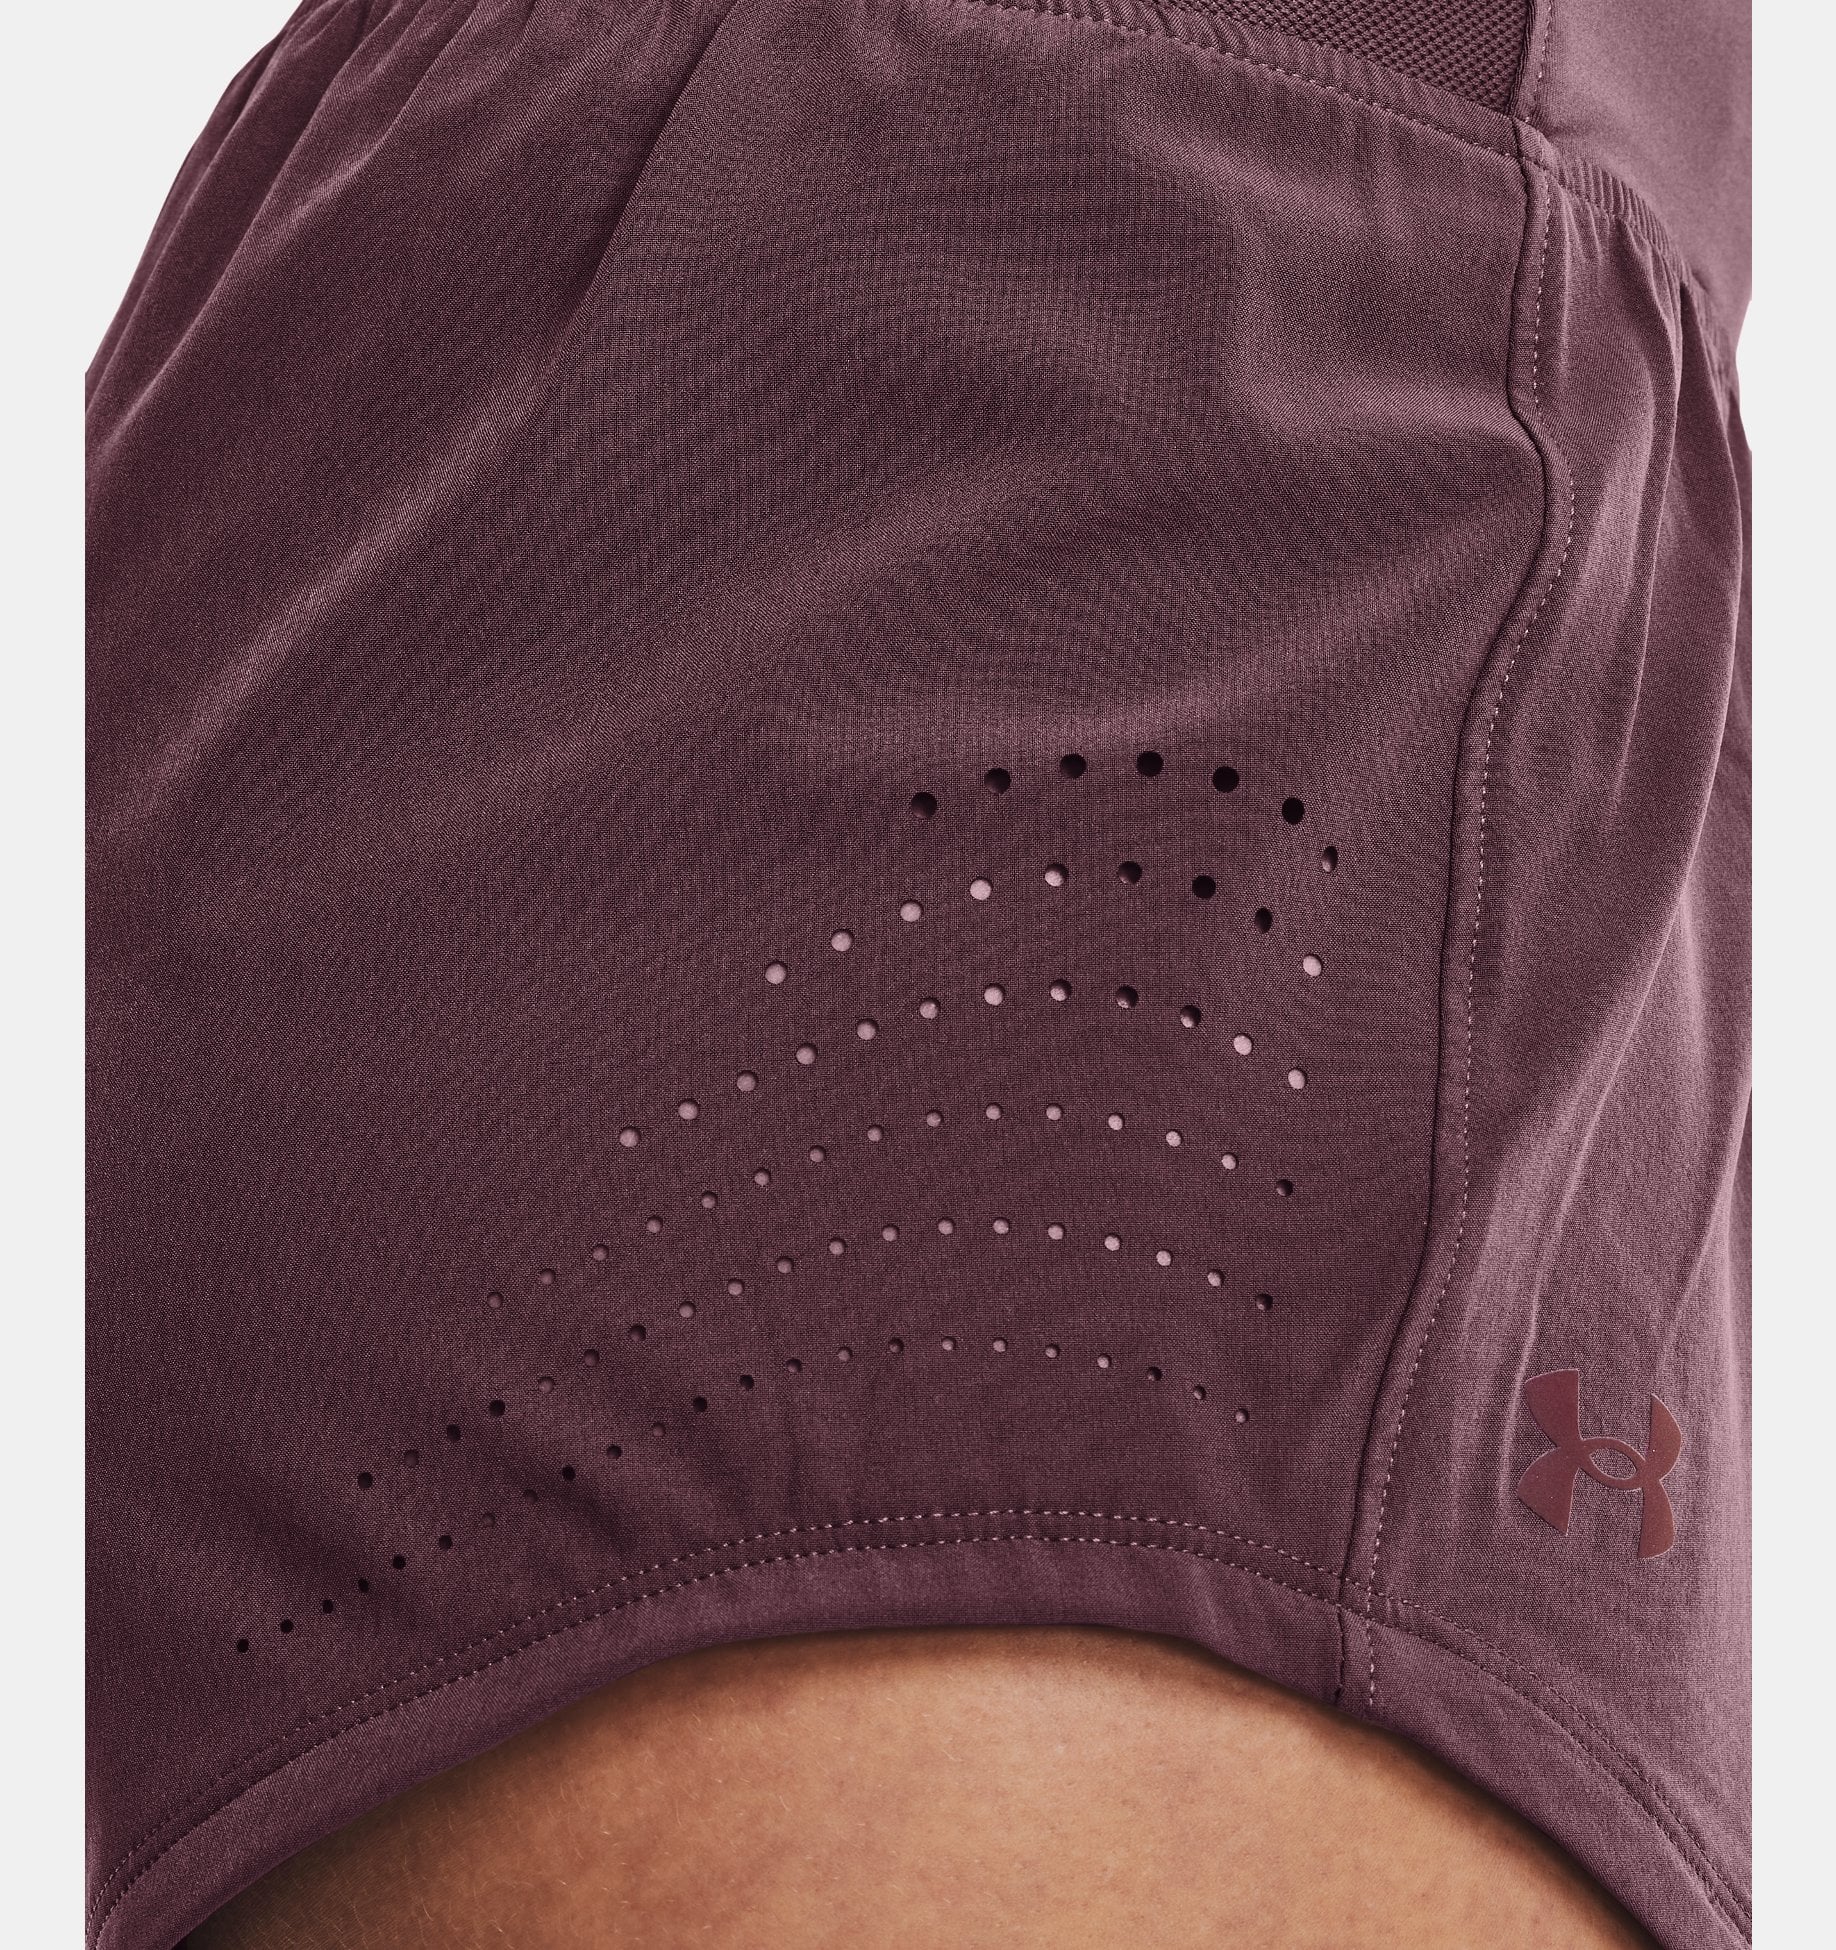 Stay comfortable and stylish with Under Armour Women's Speedpocket Shorts